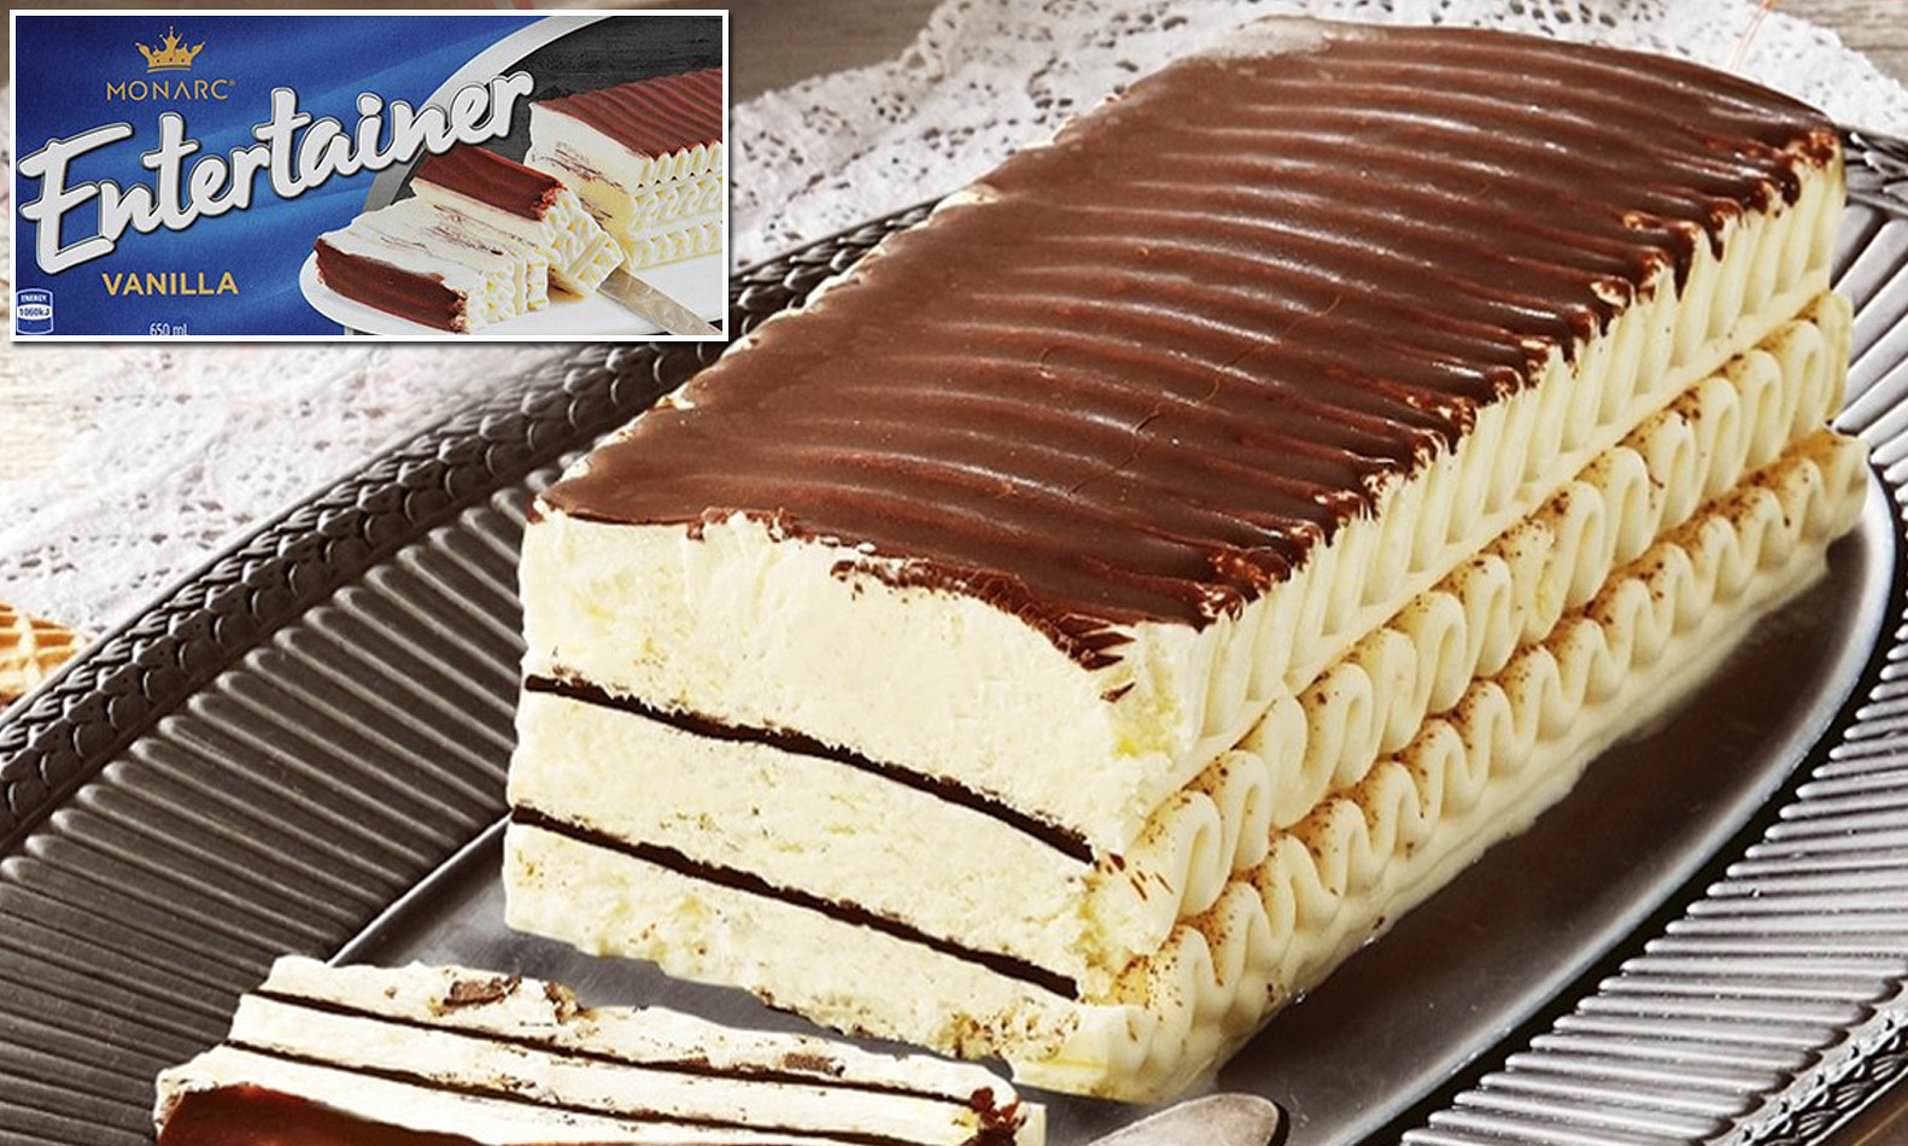 Is there anywhere locally that sells viennetta ice cream ...